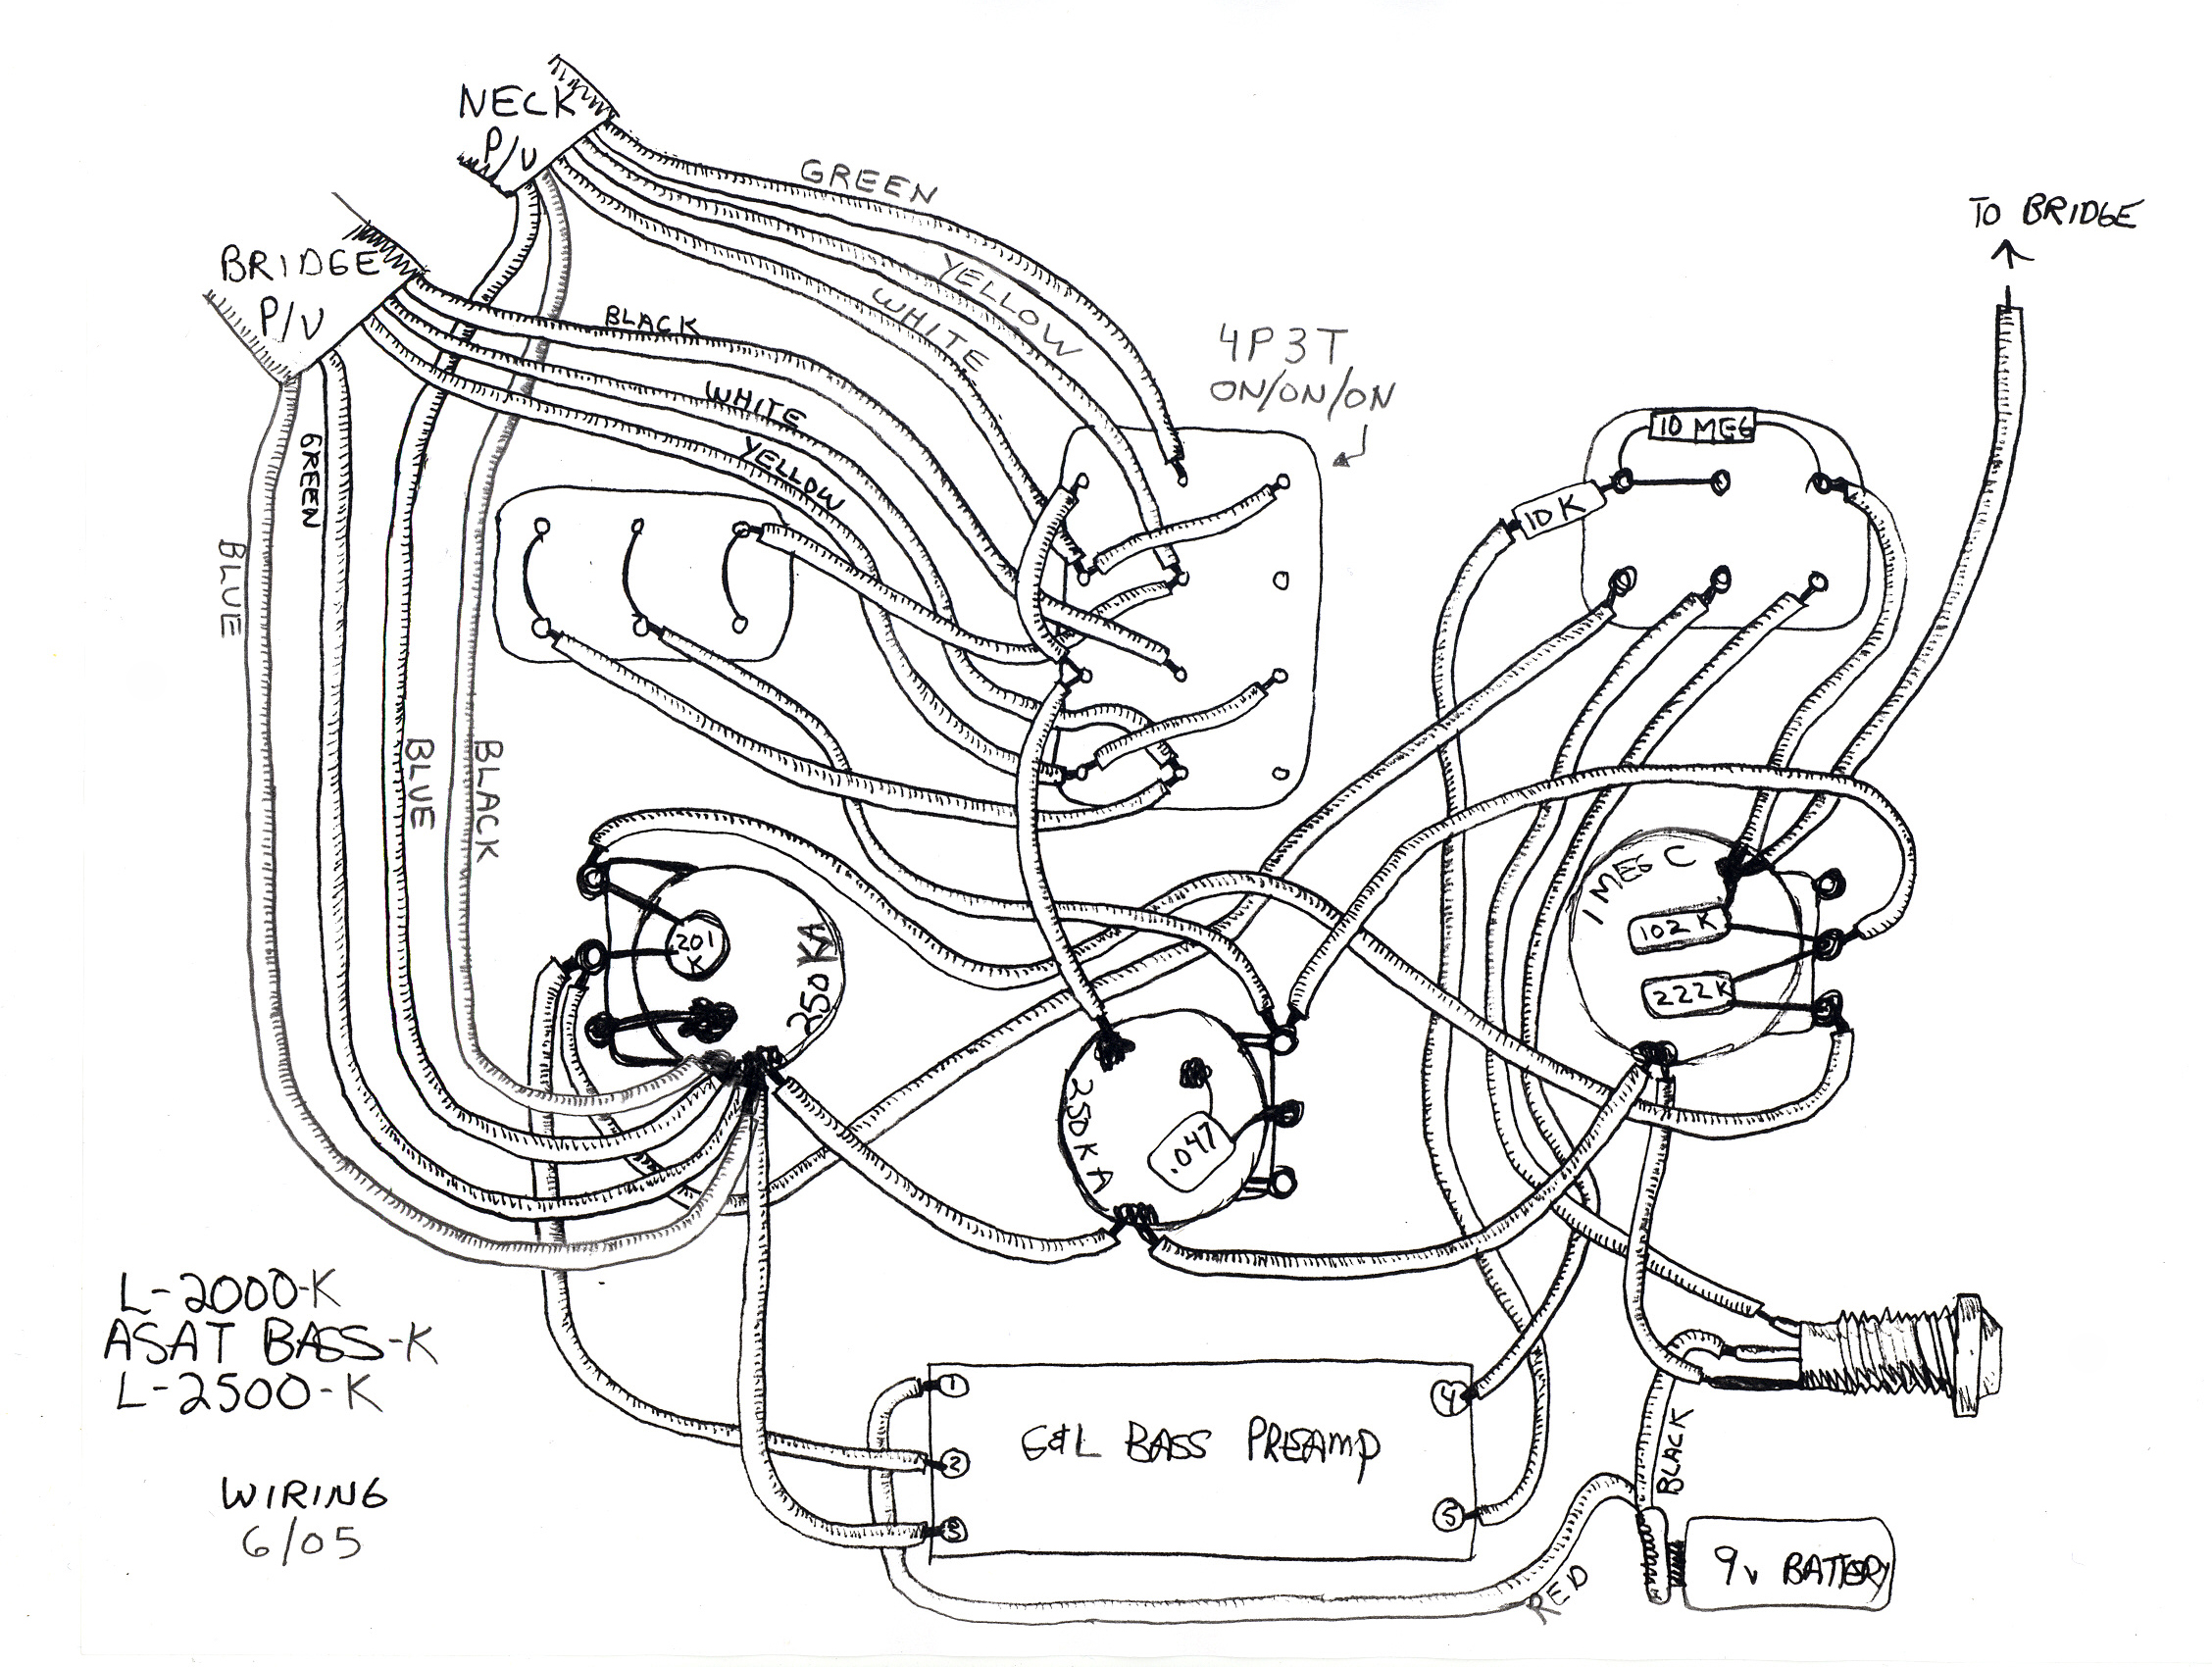 Les Paul Wiring Diagram Pdf from bassesbyleo.com